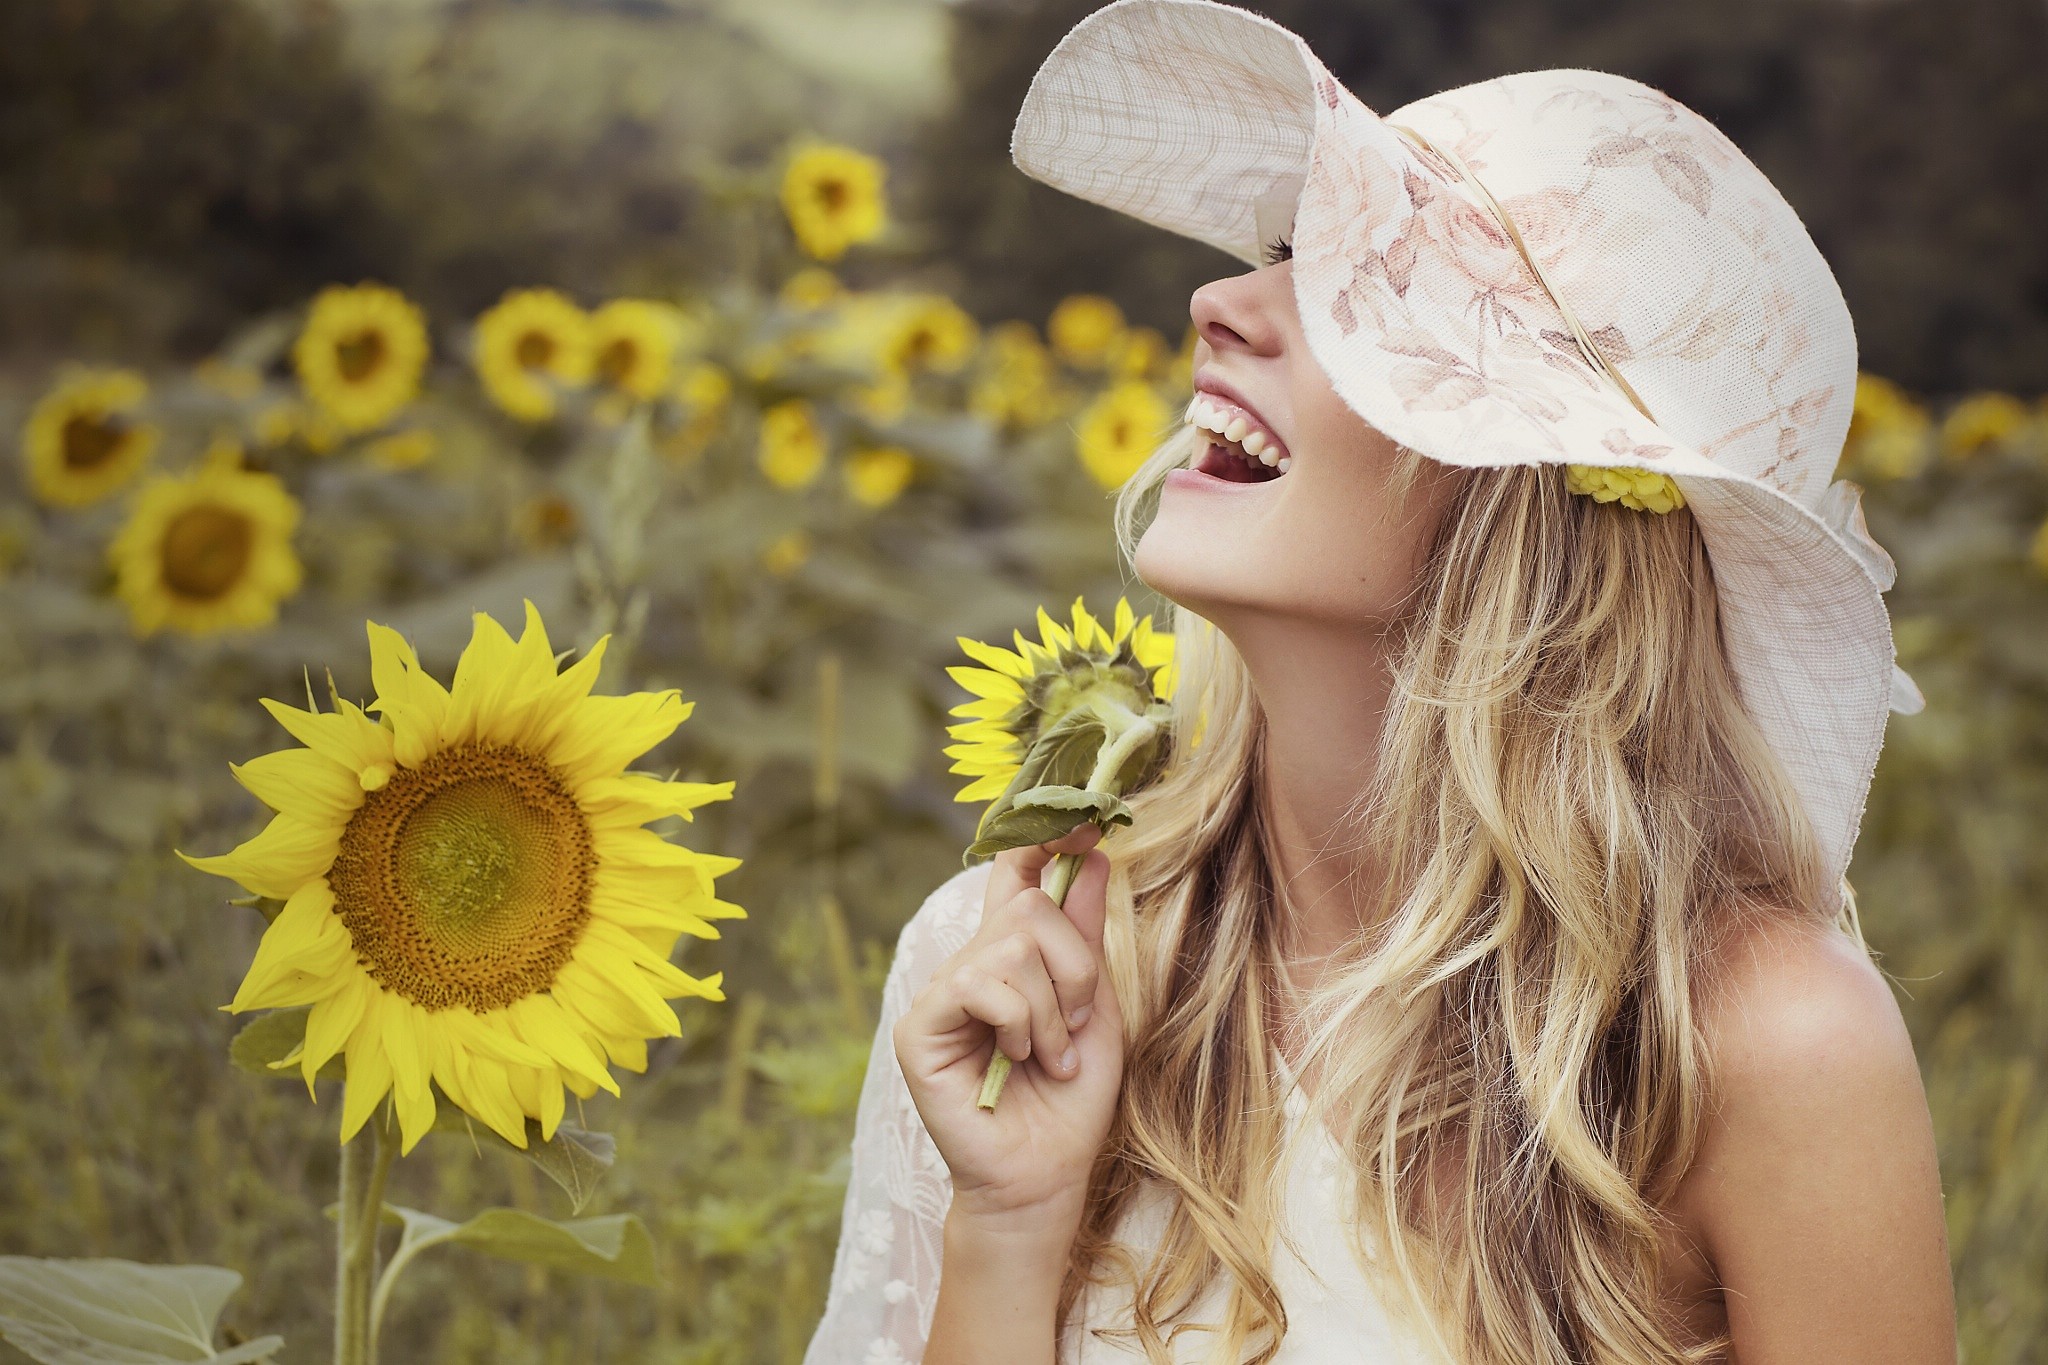 People 2048x1365 women model blonde sunflowers smiling hat long hair wavy hair women outdoors flowers yellow flowers outdoors plants open mouth women with hats